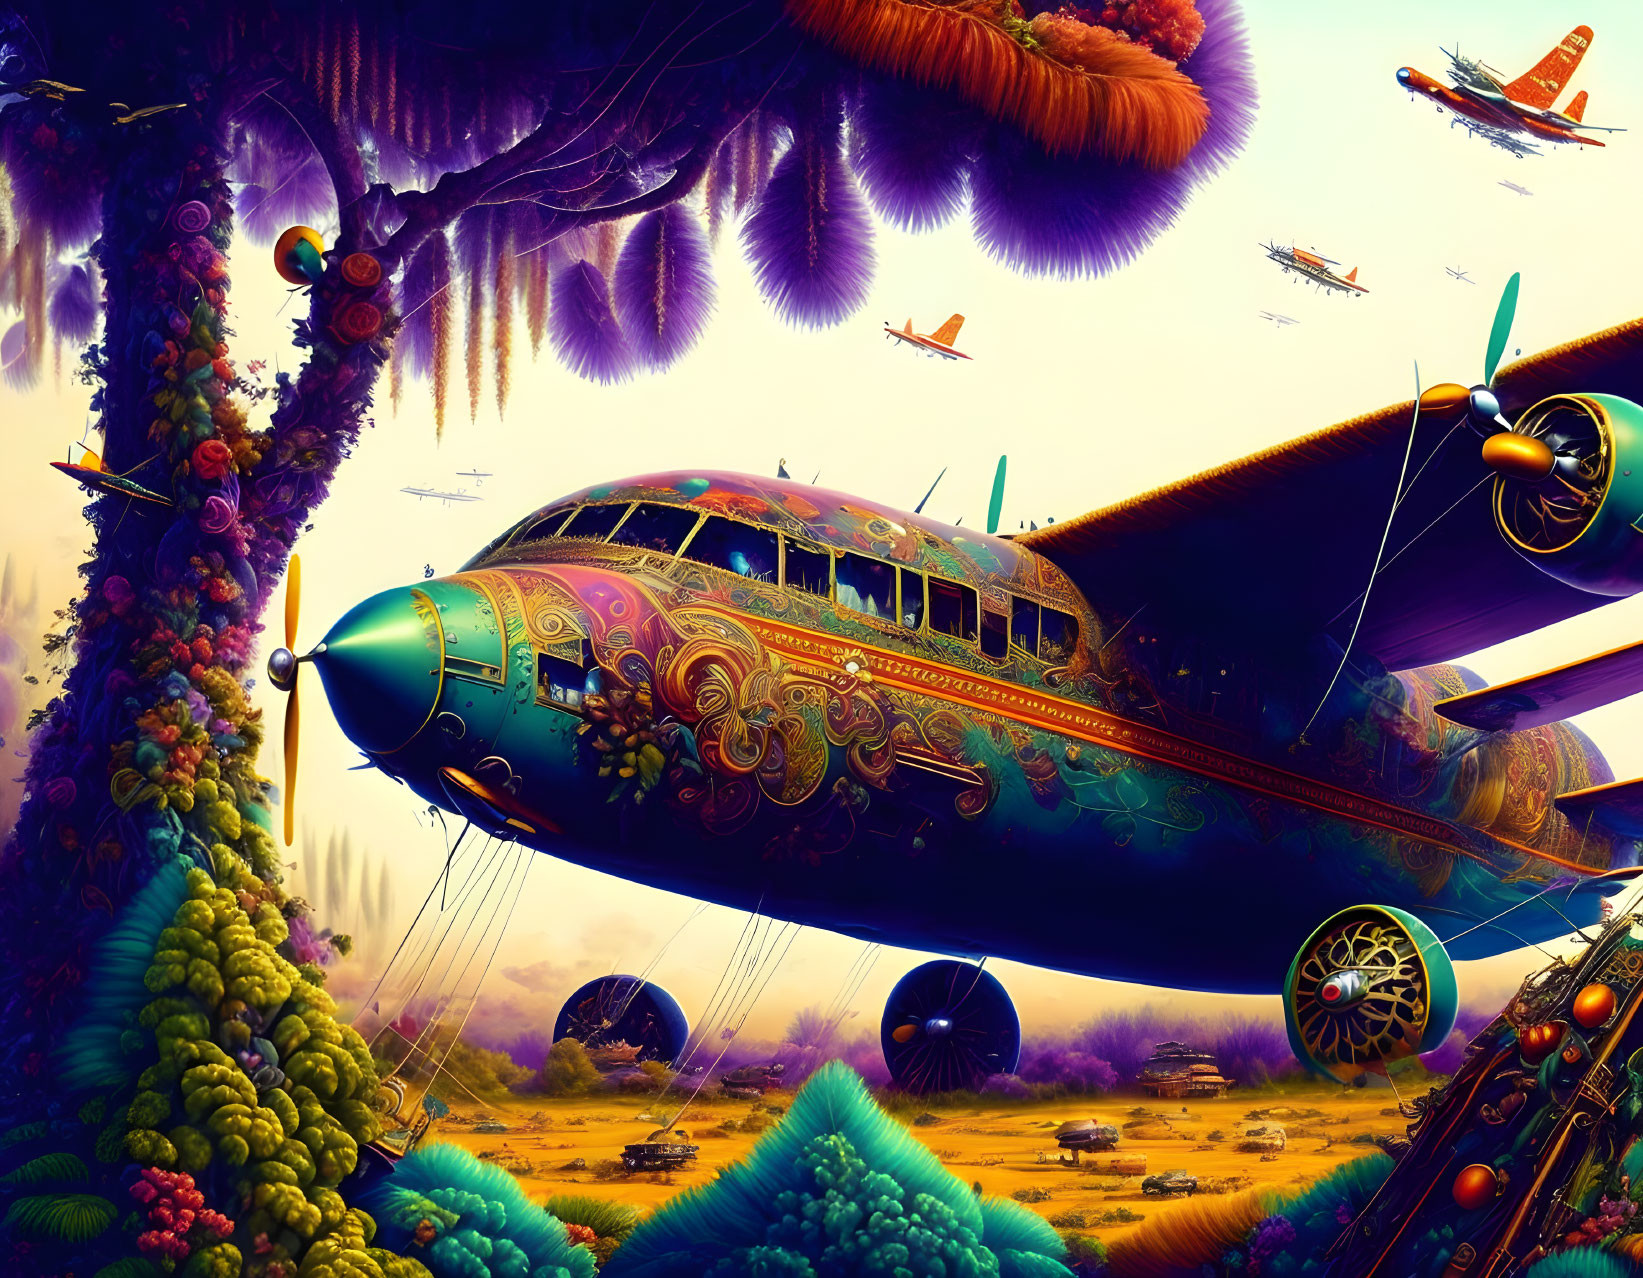 Colorful Fantastical Landscape with Ornate Flying Machines and Surreal Flora